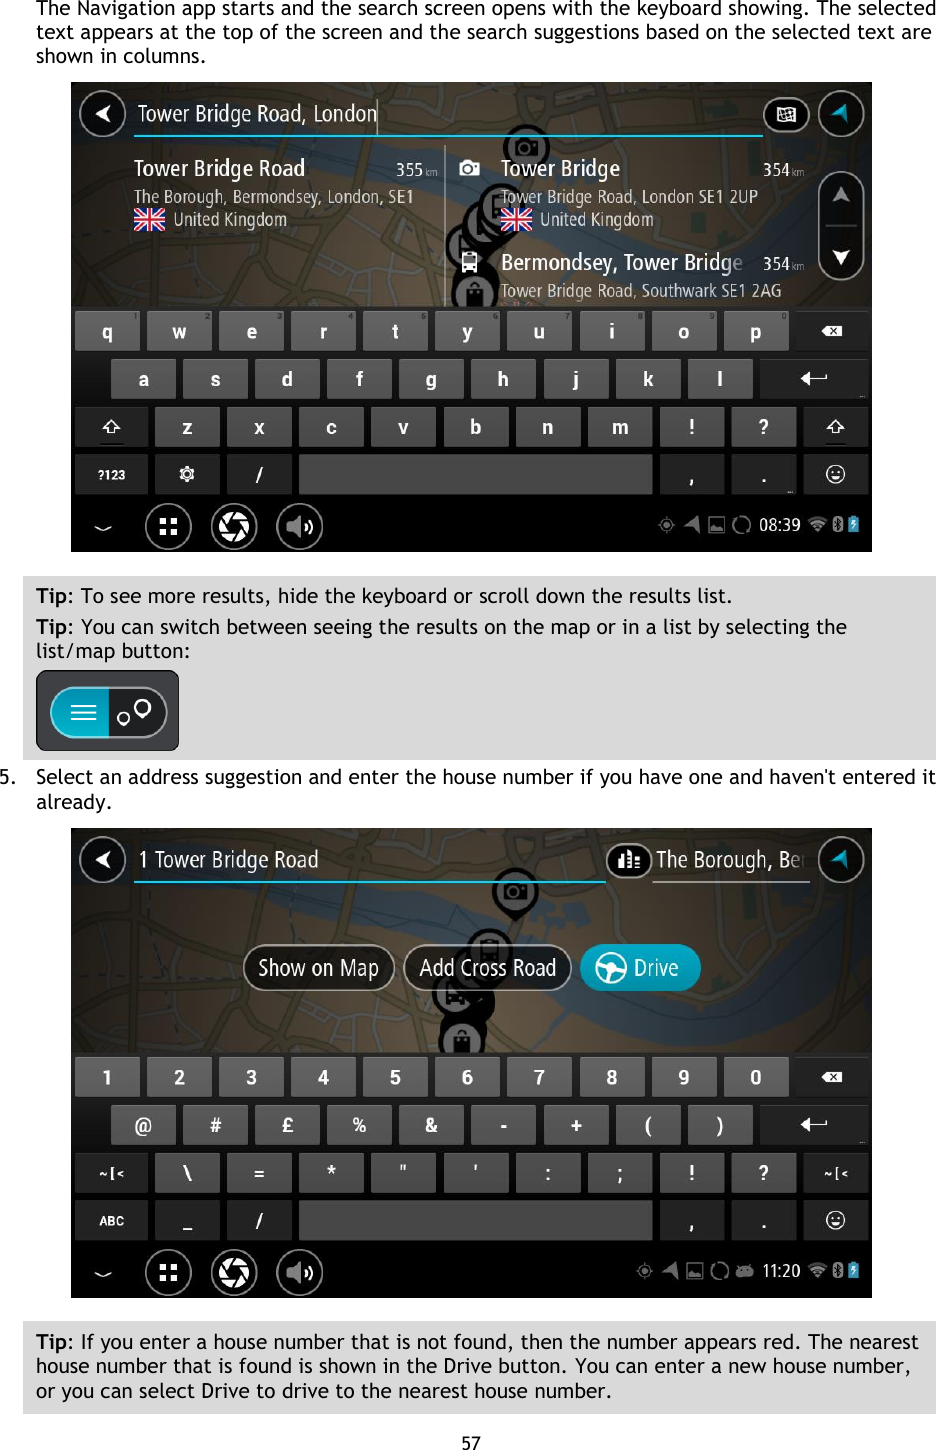 57    The Navigation app starts and the search screen opens with the keyboard showing. The selected text appears at the top of the screen and the search suggestions based on the selected text are shown in columns.  Tip: To see more results, hide the keyboard or scroll down the results list. Tip: You can switch between seeing the results on the map or in a list by selecting the list/map button:    5. Select an address suggestion and enter the house number if you have one and haven&apos;t entered it already.  Tip: If you enter a house number that is not found, then the number appears red. The nearest house number that is found is shown in the Drive button. You can enter a new house number, or you can select Drive to drive to the nearest house number. 